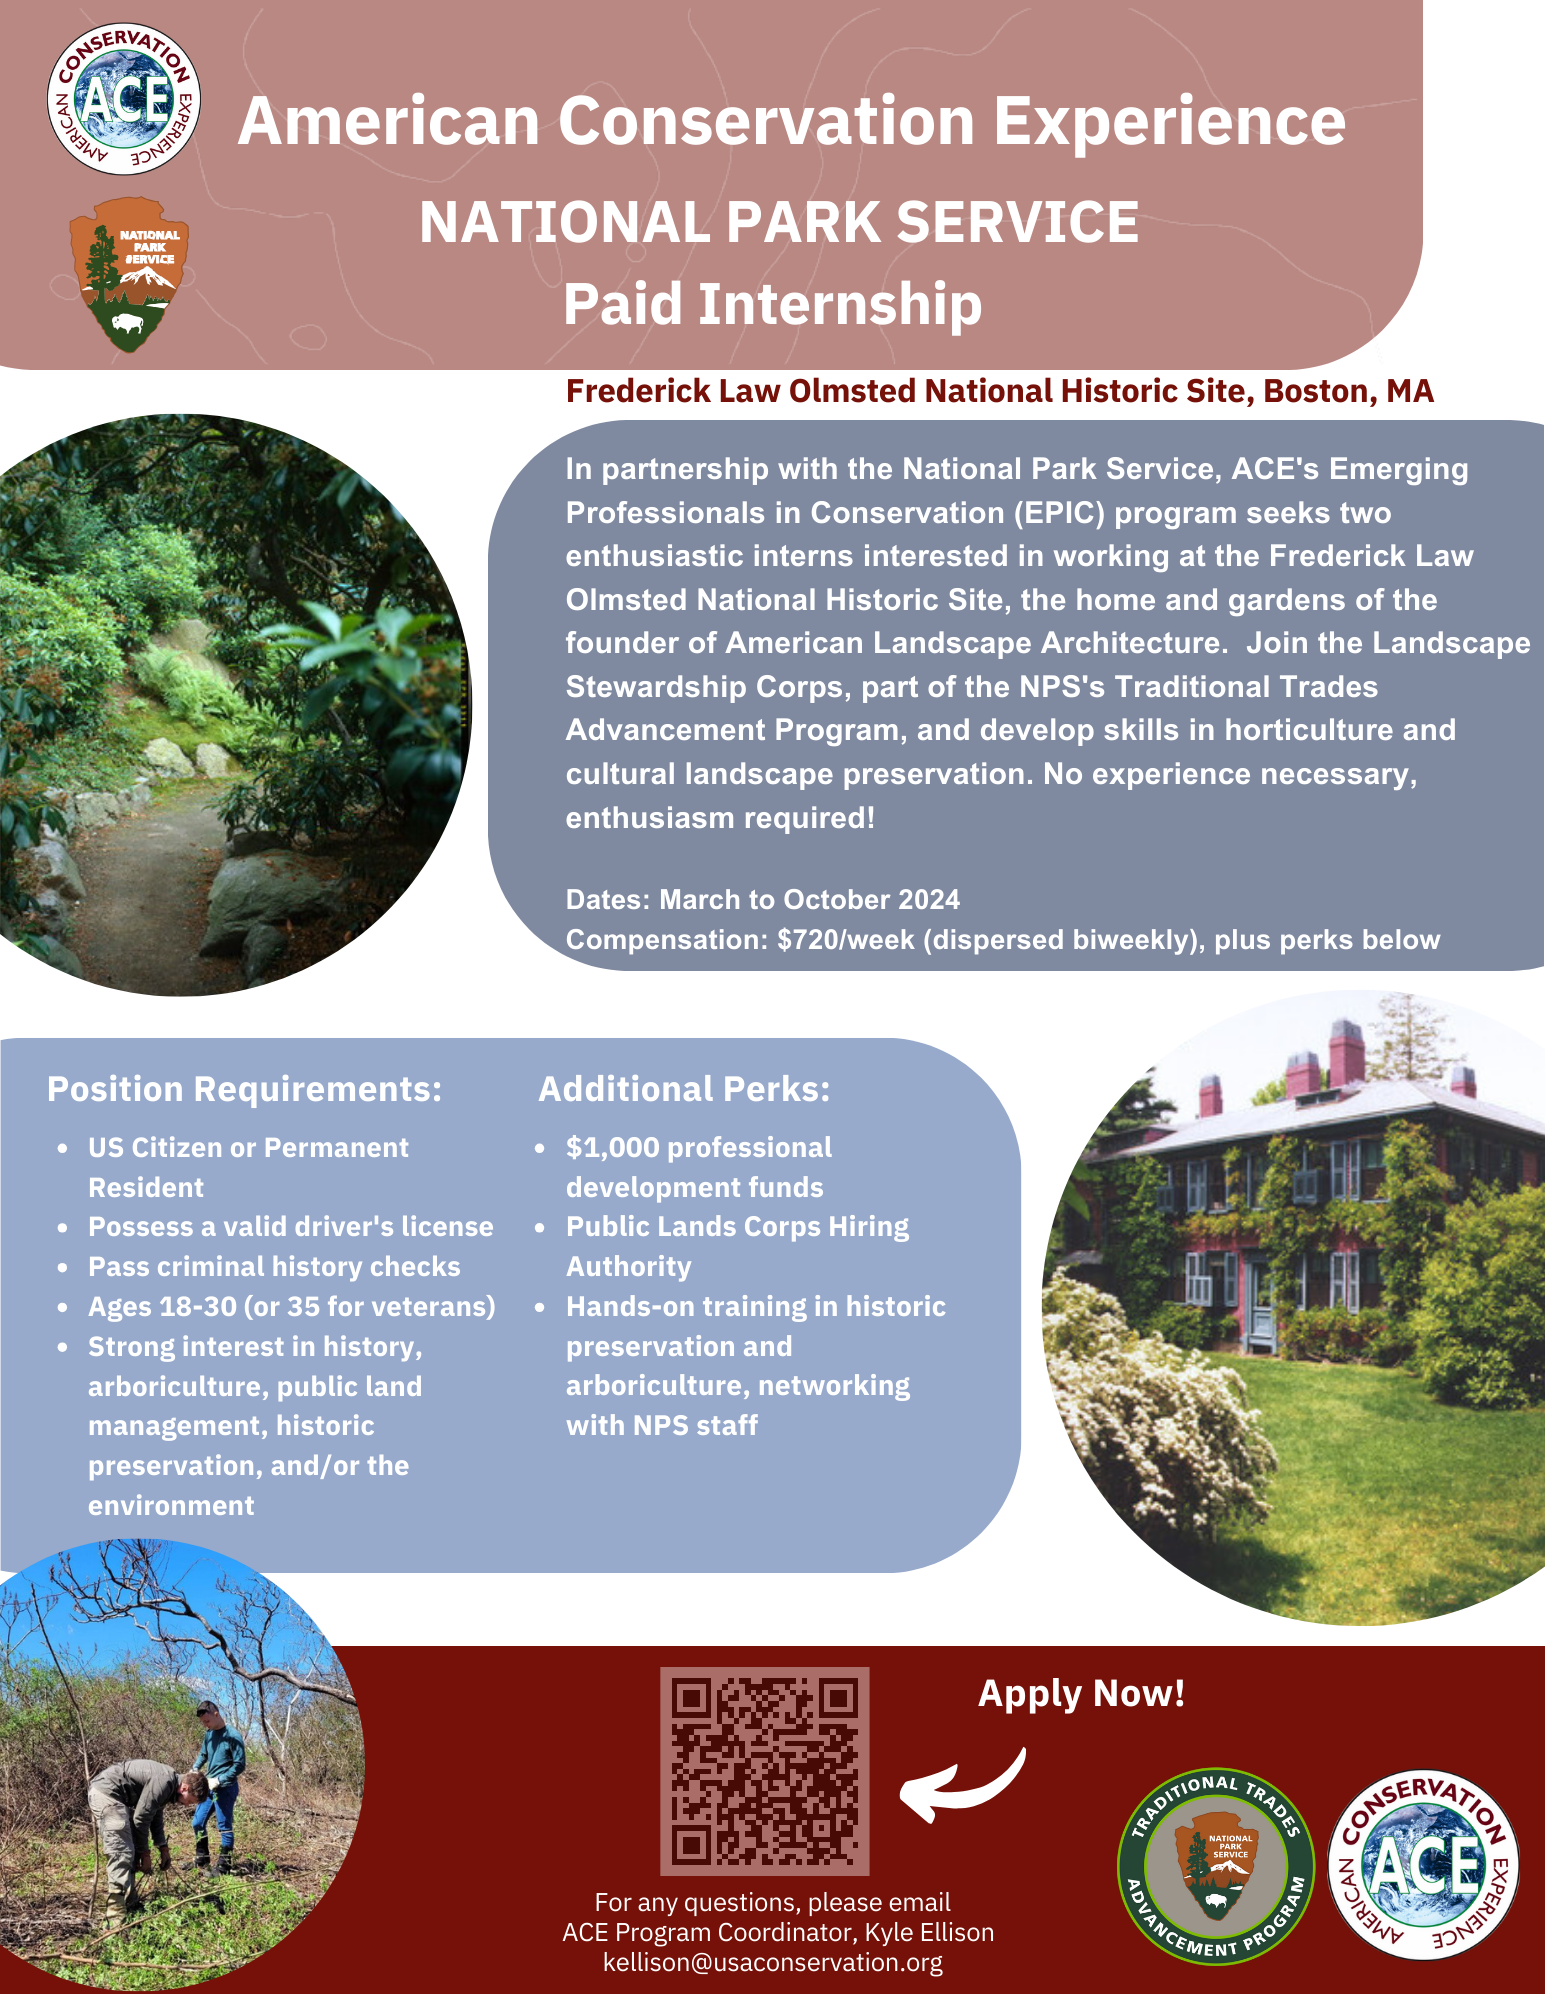 Flyer announcing TTAP internship including information listed in text and images of landscape